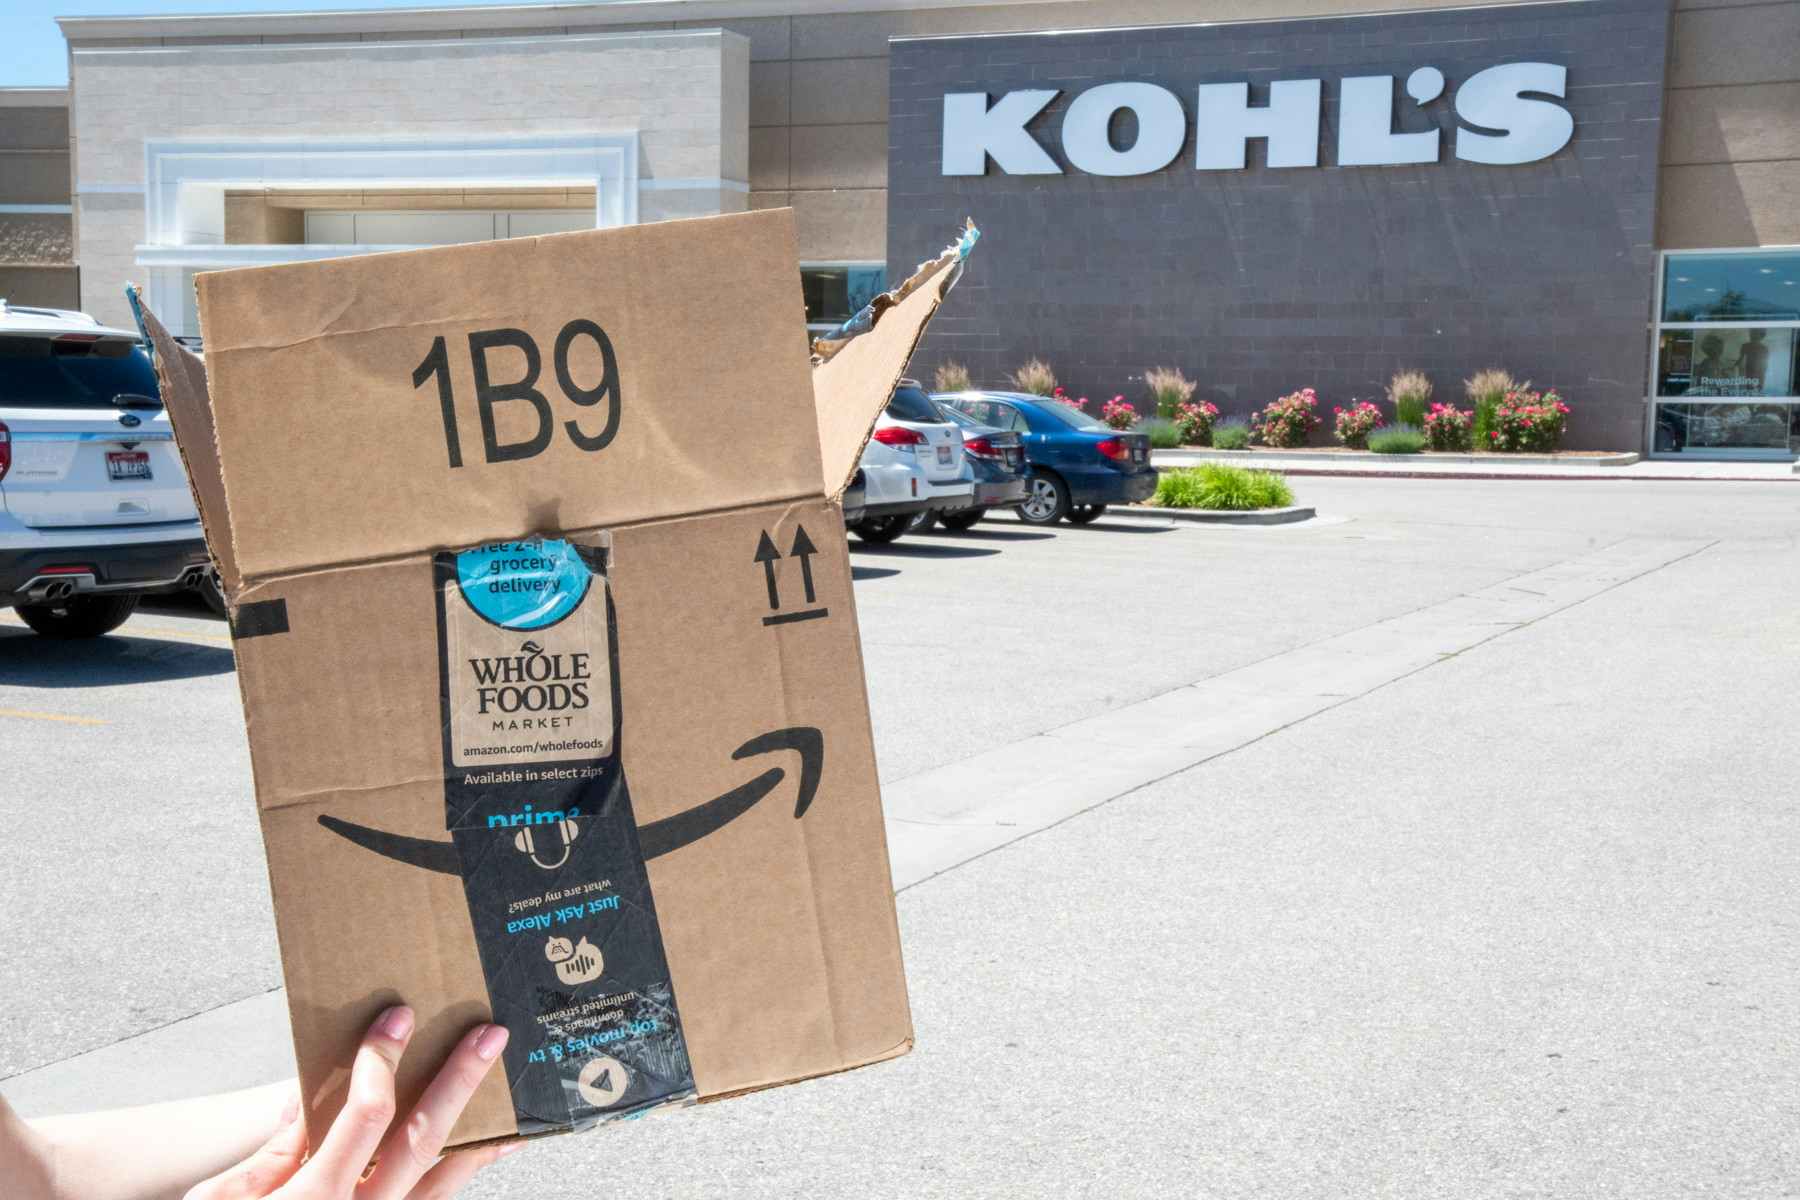 Someone is holding their Amazon purchase in front of a Kohl's storefront.